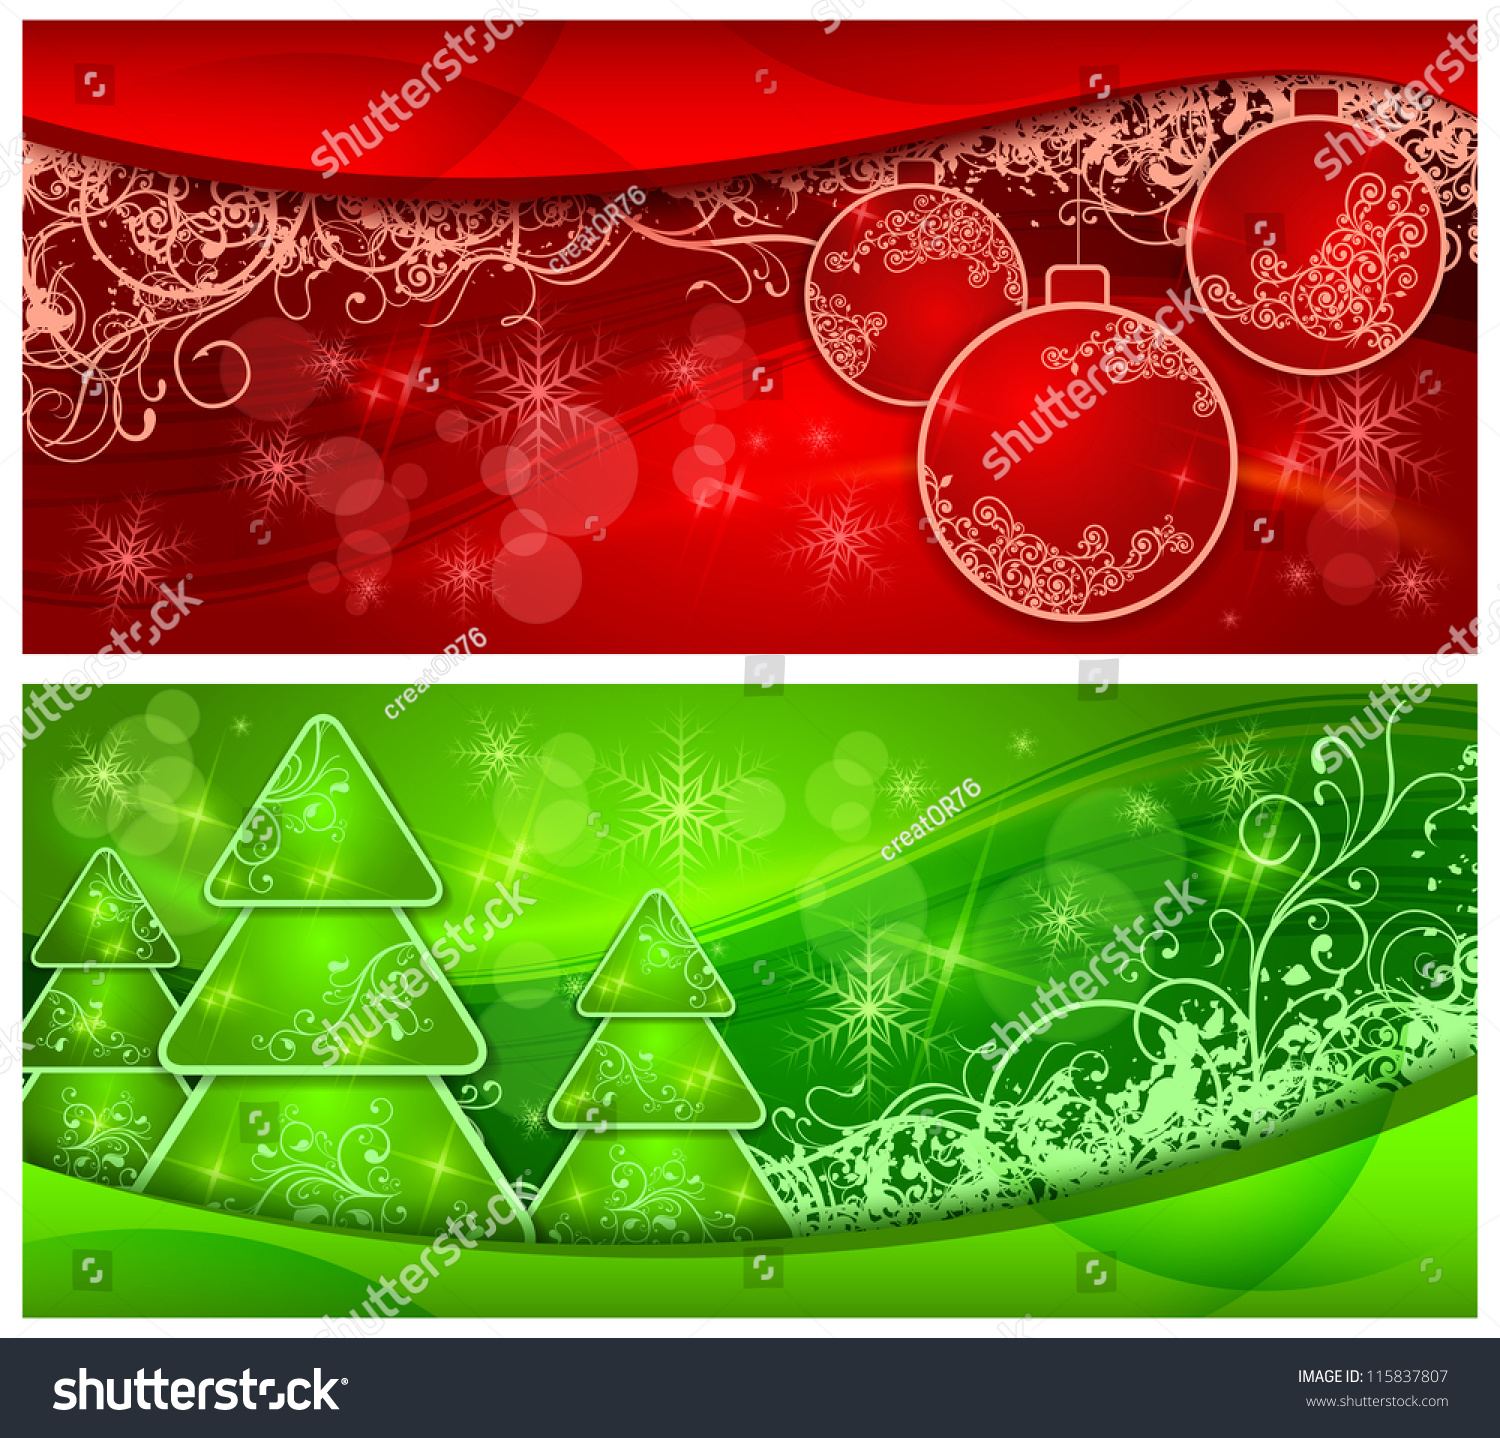 Christmas Two Background With Fir Trees And Balls In Red And Green ...